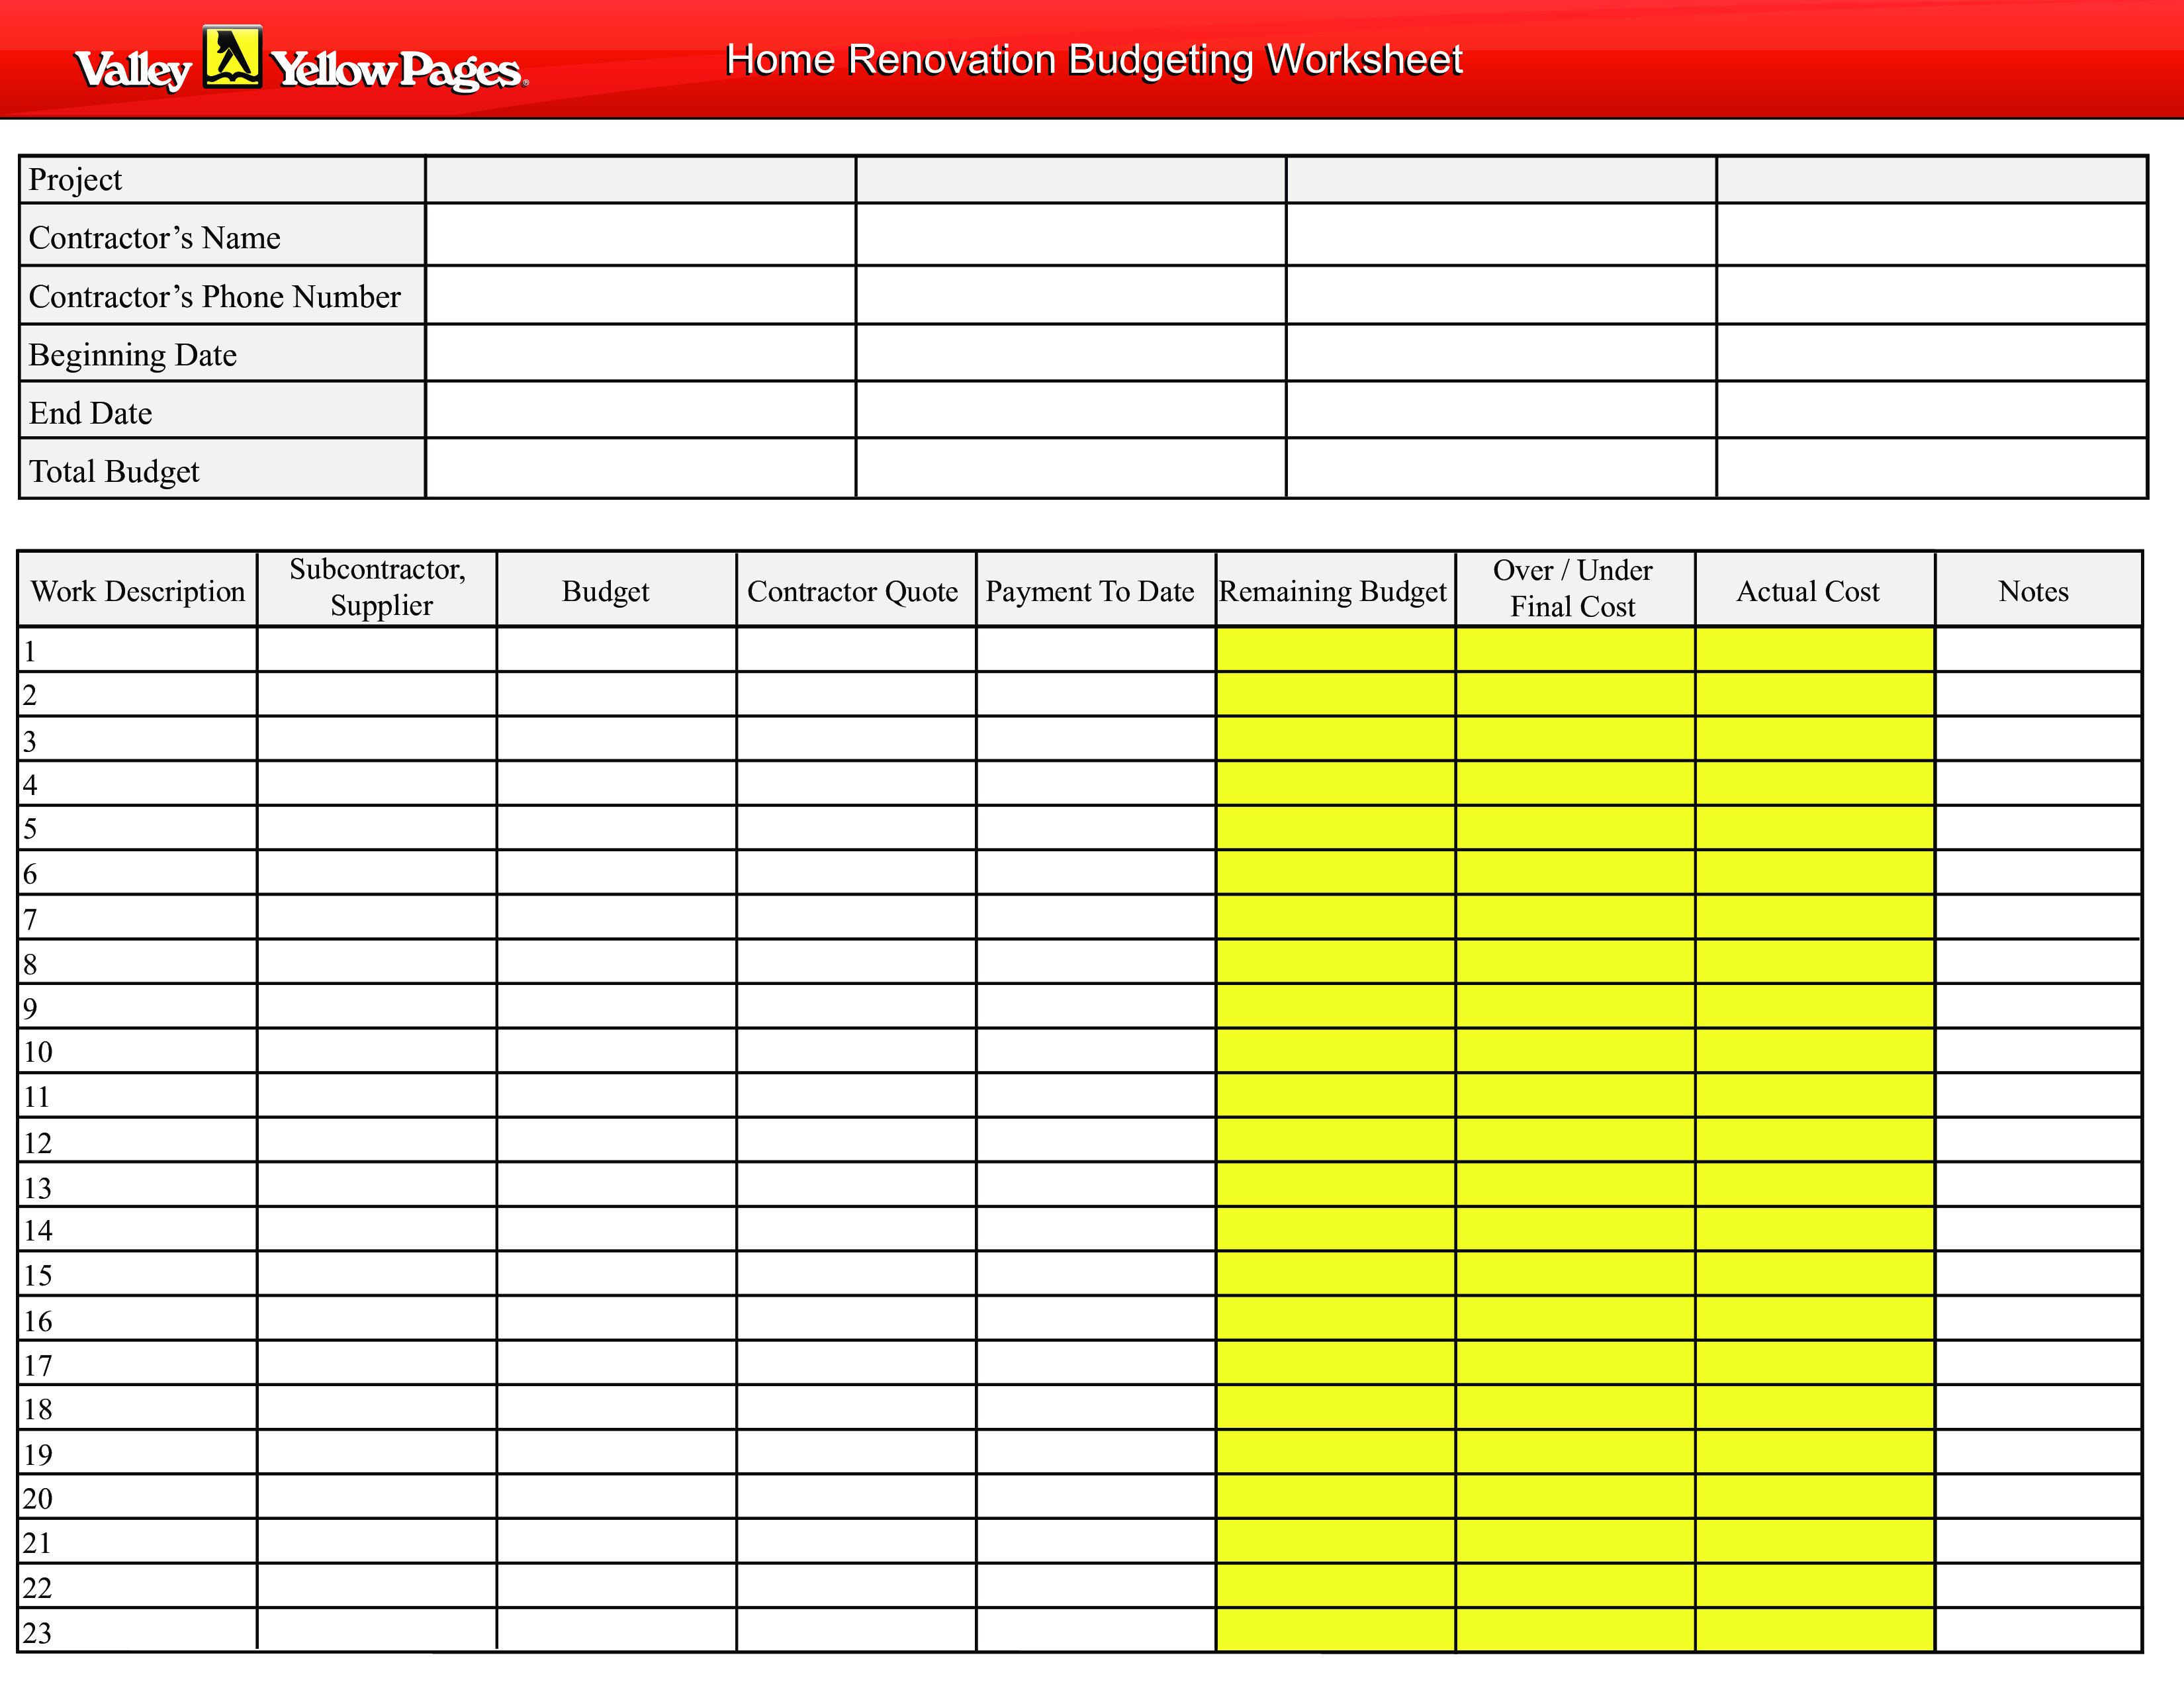 Home Renovation Budget Spreadsheet throughout Free Home Renovation Budget Worksheet Templates At